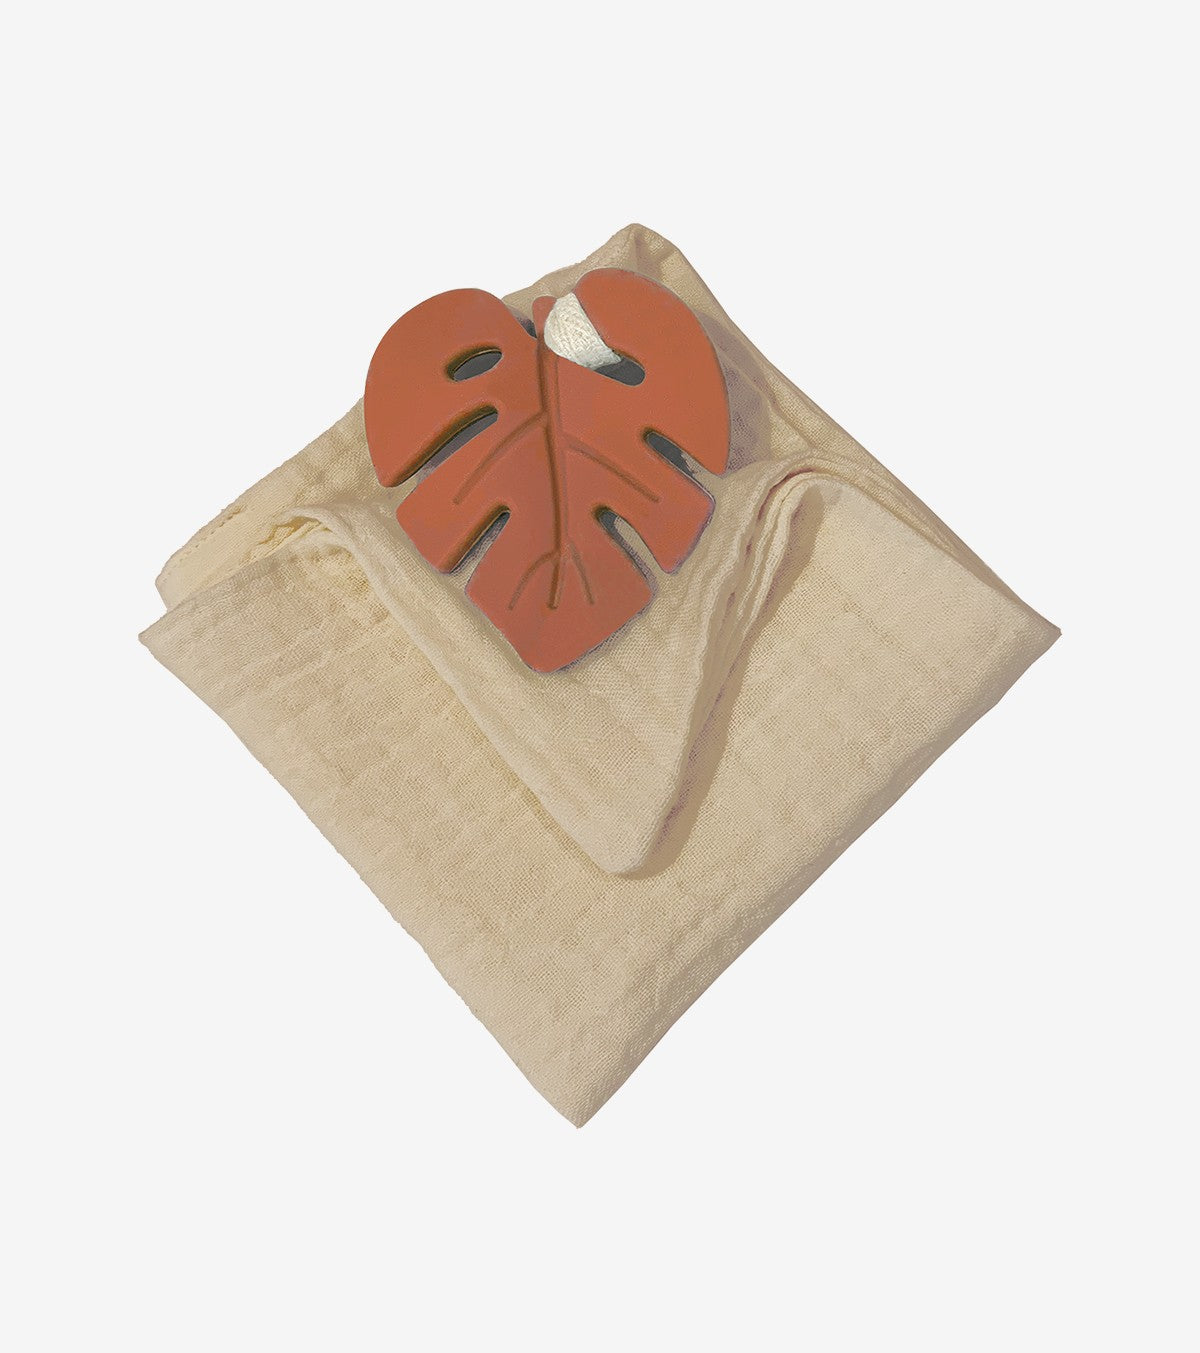 Teething ring with terracotta leaf and diaper